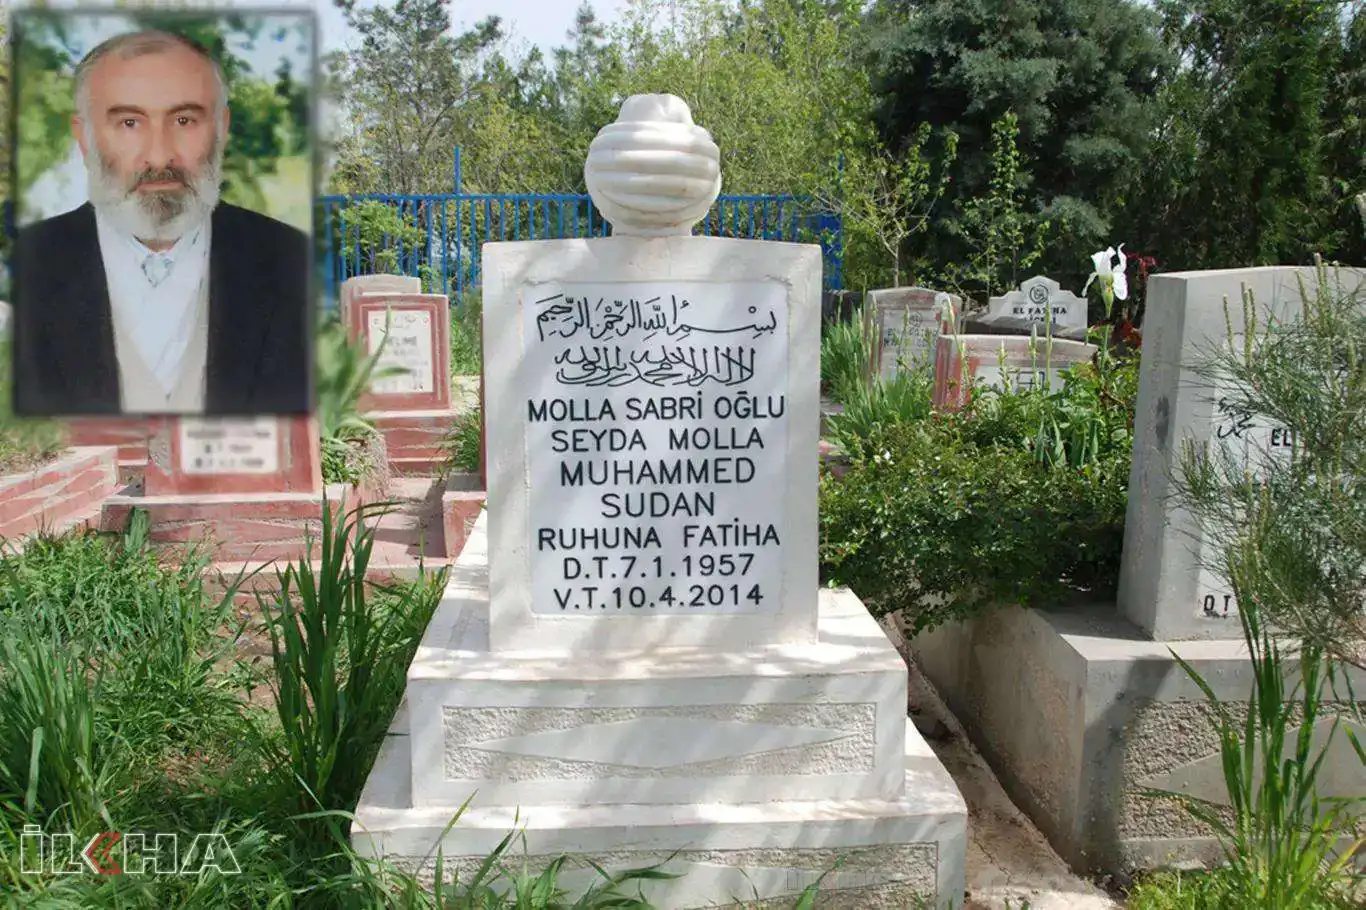 Islamic scholar Muhammed Sudan commemorated on the ninth anniversary of his death